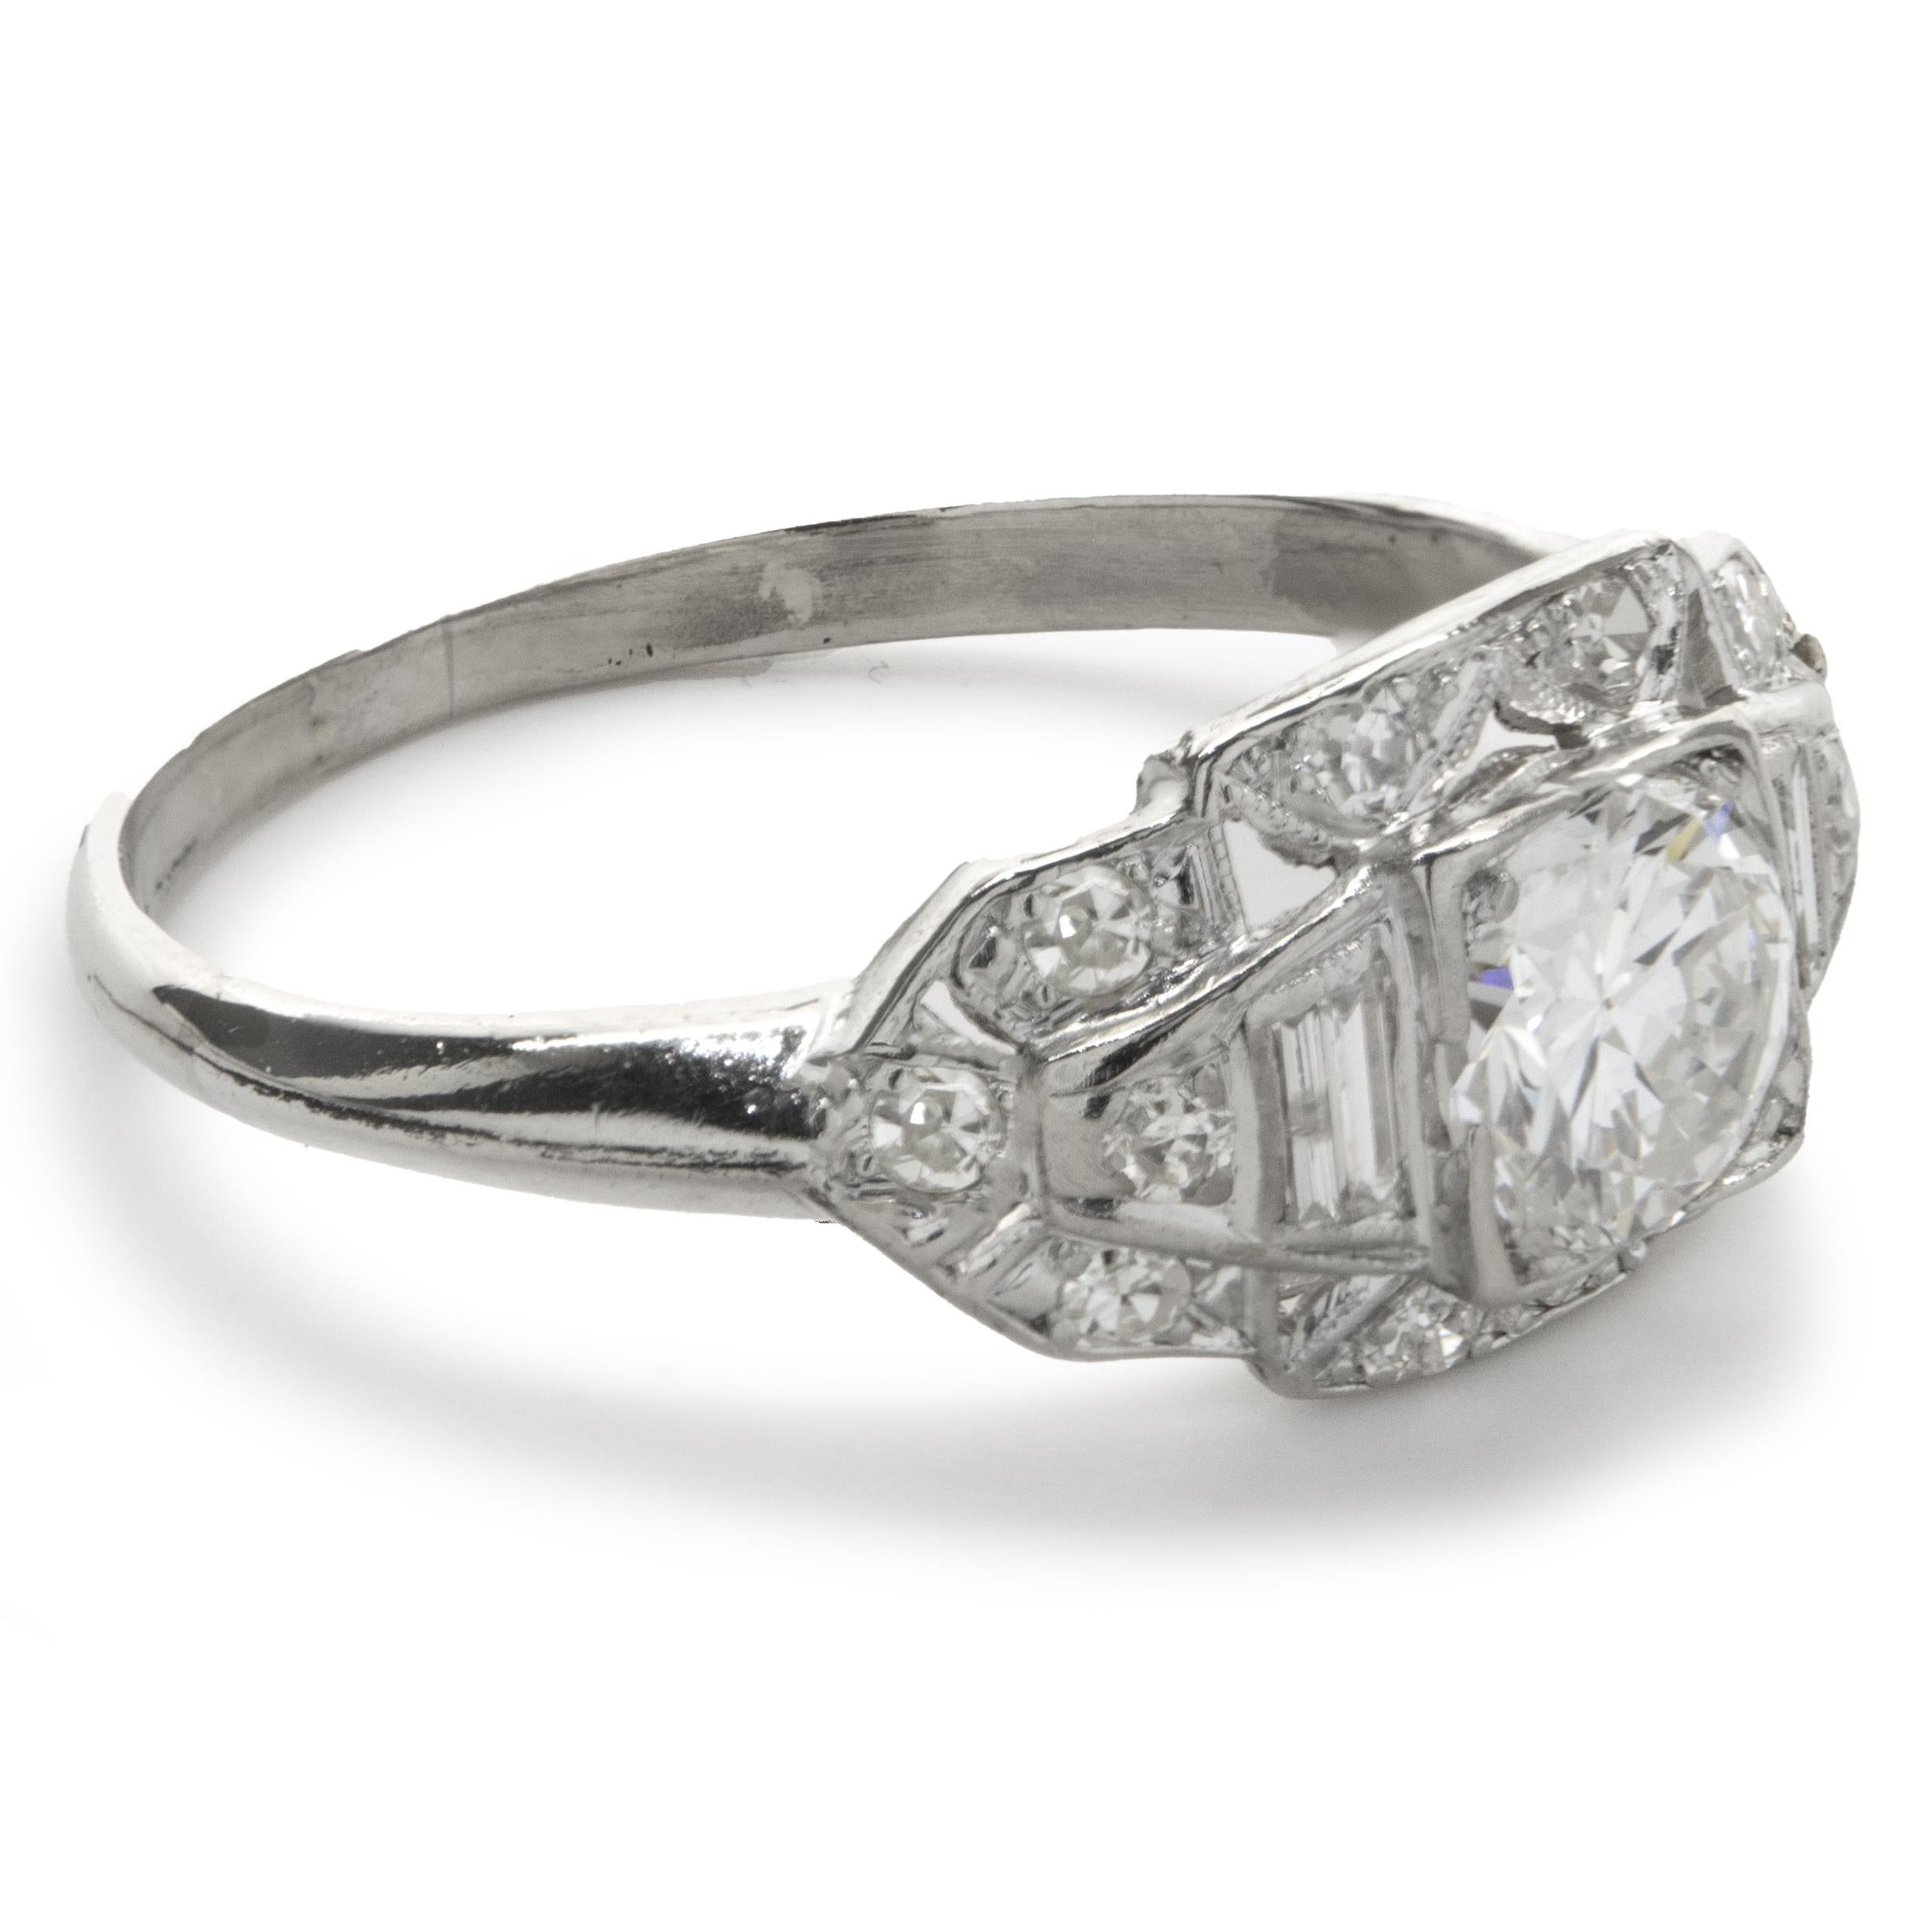 Designer: custom
Material: Platinum
Diamond: 1 round European cut = .70ct
Color: F
Clarity: SI1
Diamond: 14 round and baguette cut = .25cttw
Color: G
Clarity: SI1
Ring size: 7 (please allow two additional shipping days for sizing requests)
Weight: 